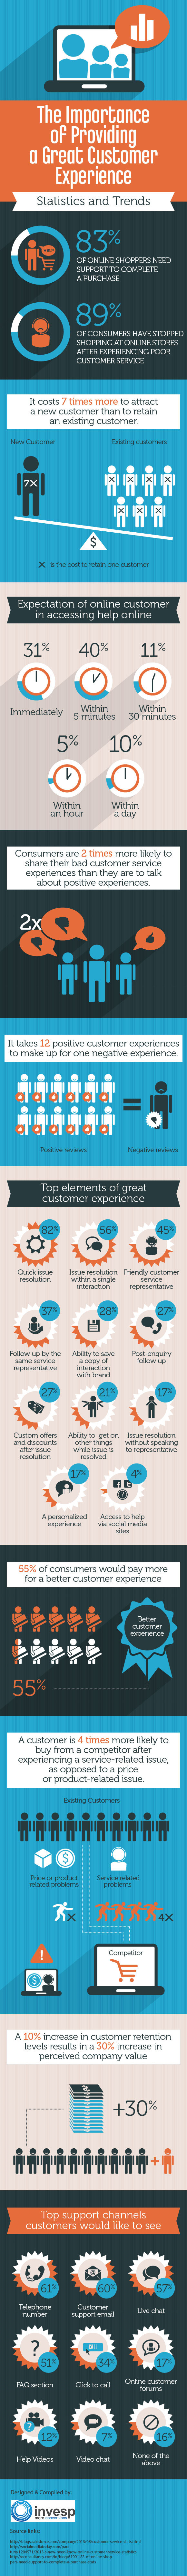 The Importance of Providing a Great Customer Experience – Statistics and Trends